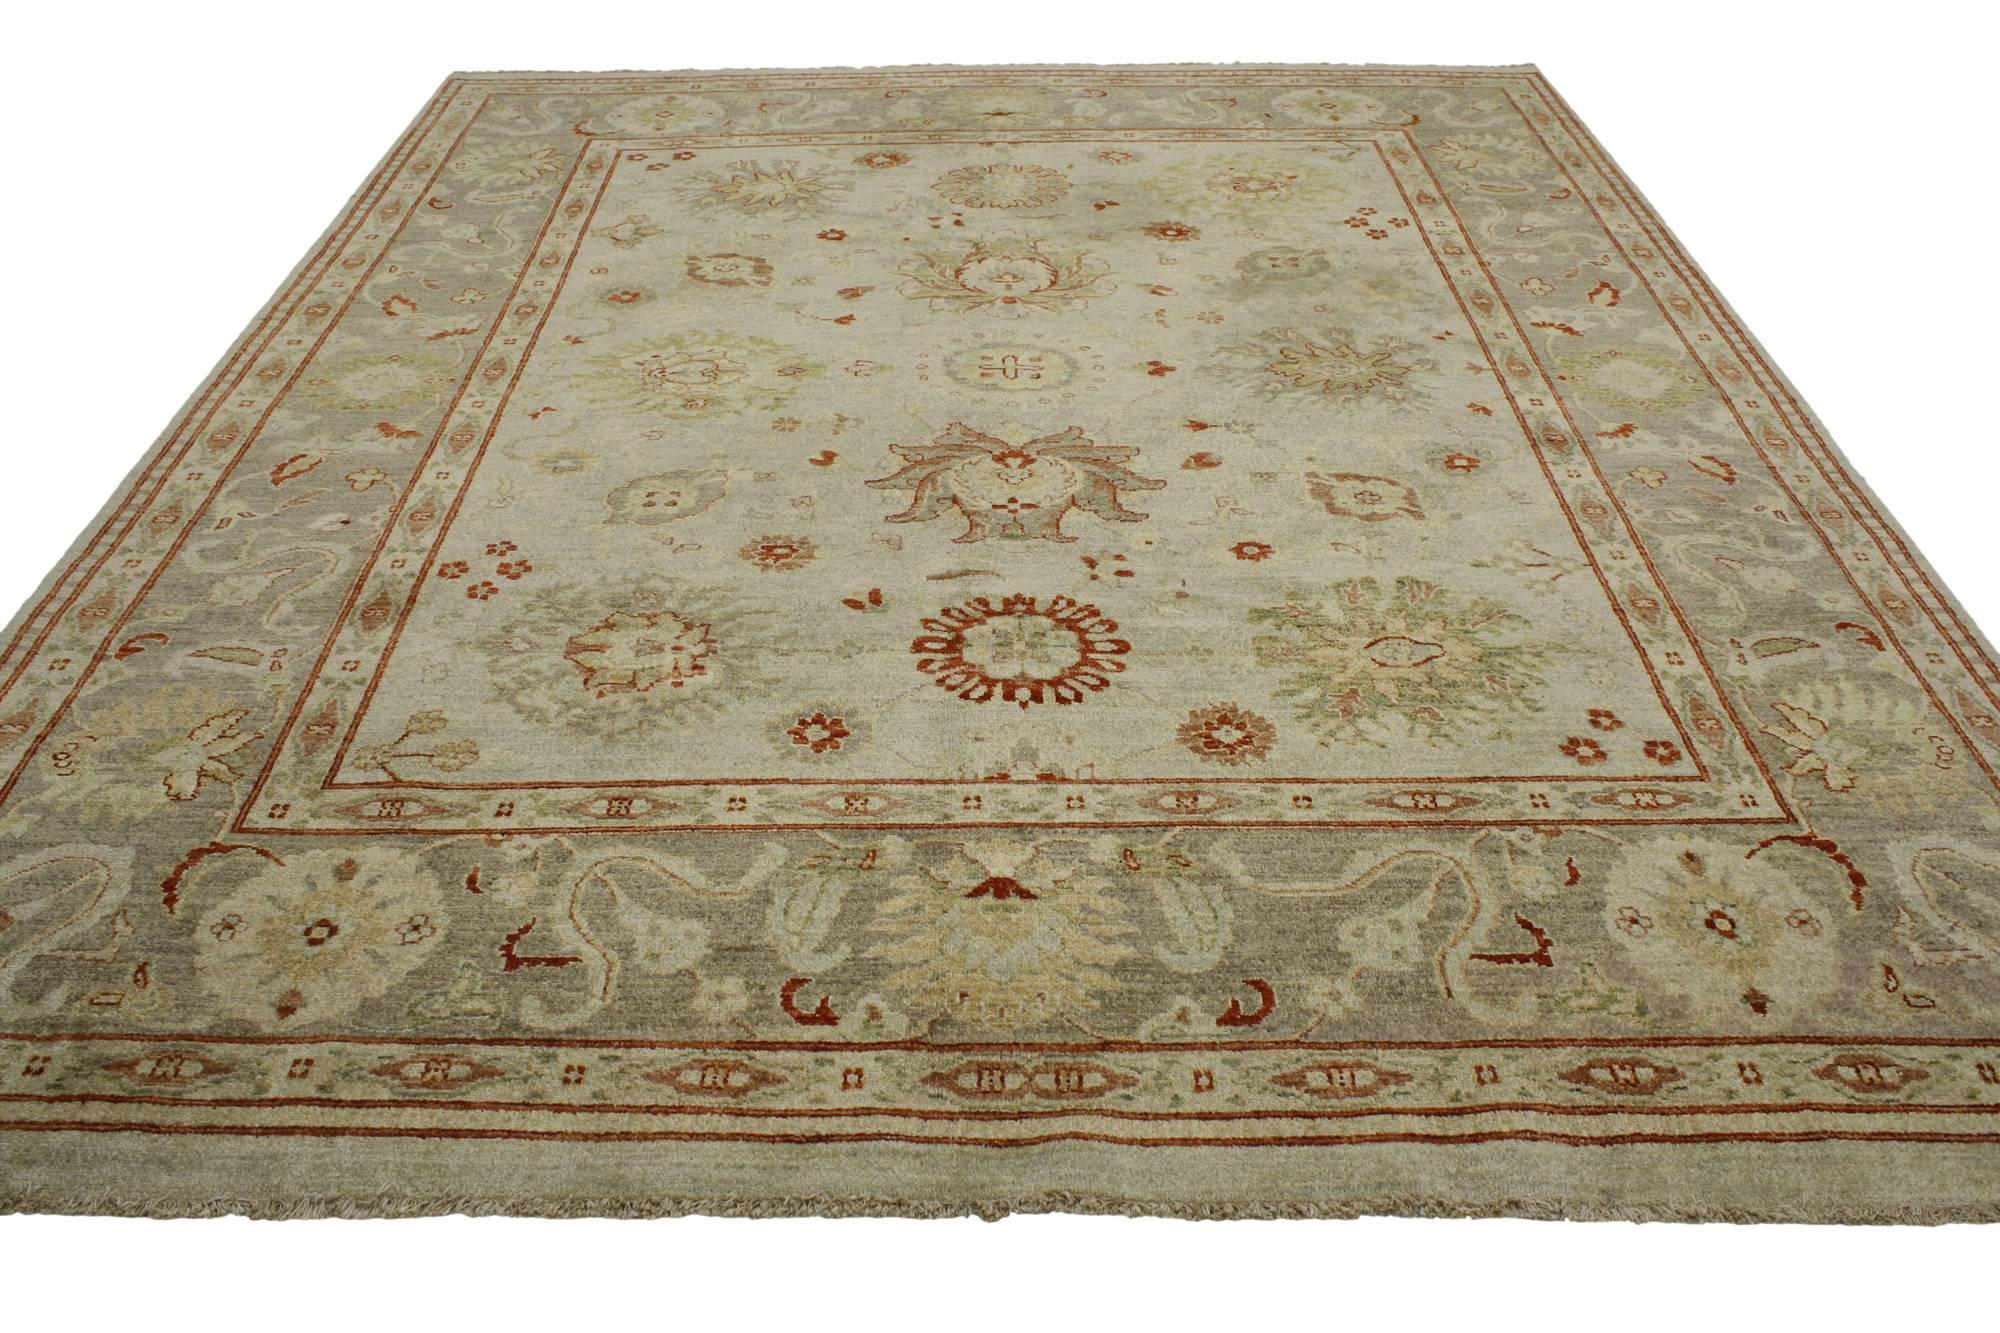 76893, new Contemporary Pakistani Oushak rug with Modern Rustic style. This hand knotted wool contemporary Oushak style area rug features an all-over geometric pattern composed of Harshang-style motifs, blooming palmettes, leafy tendrils, stylized